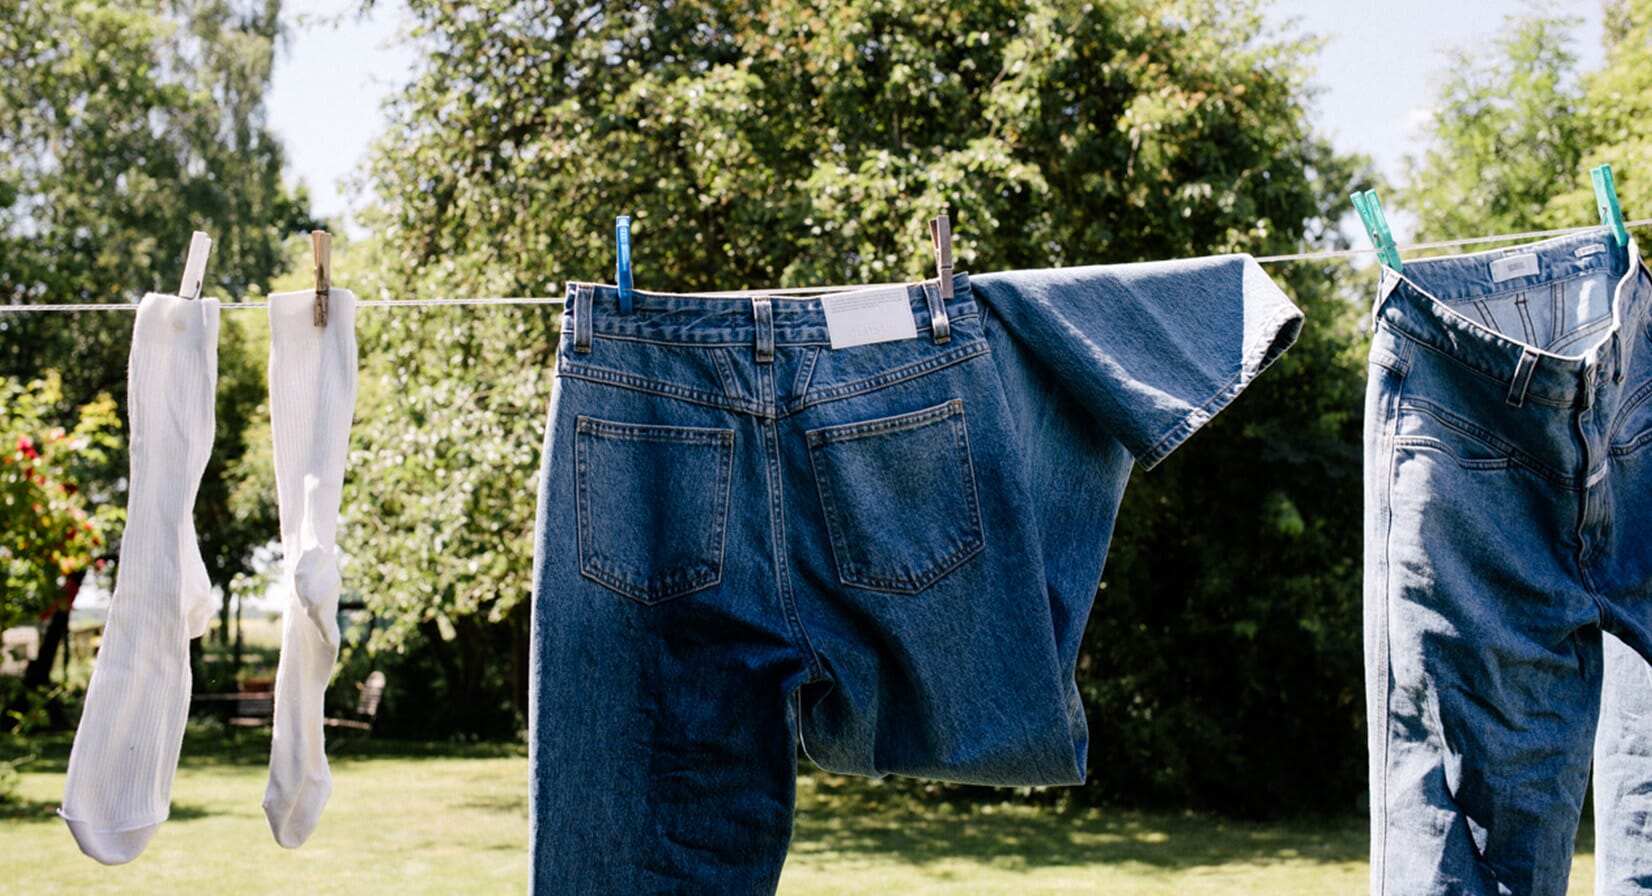 Closed's A Better Blue eco-denim line fuses style and sustainability ...